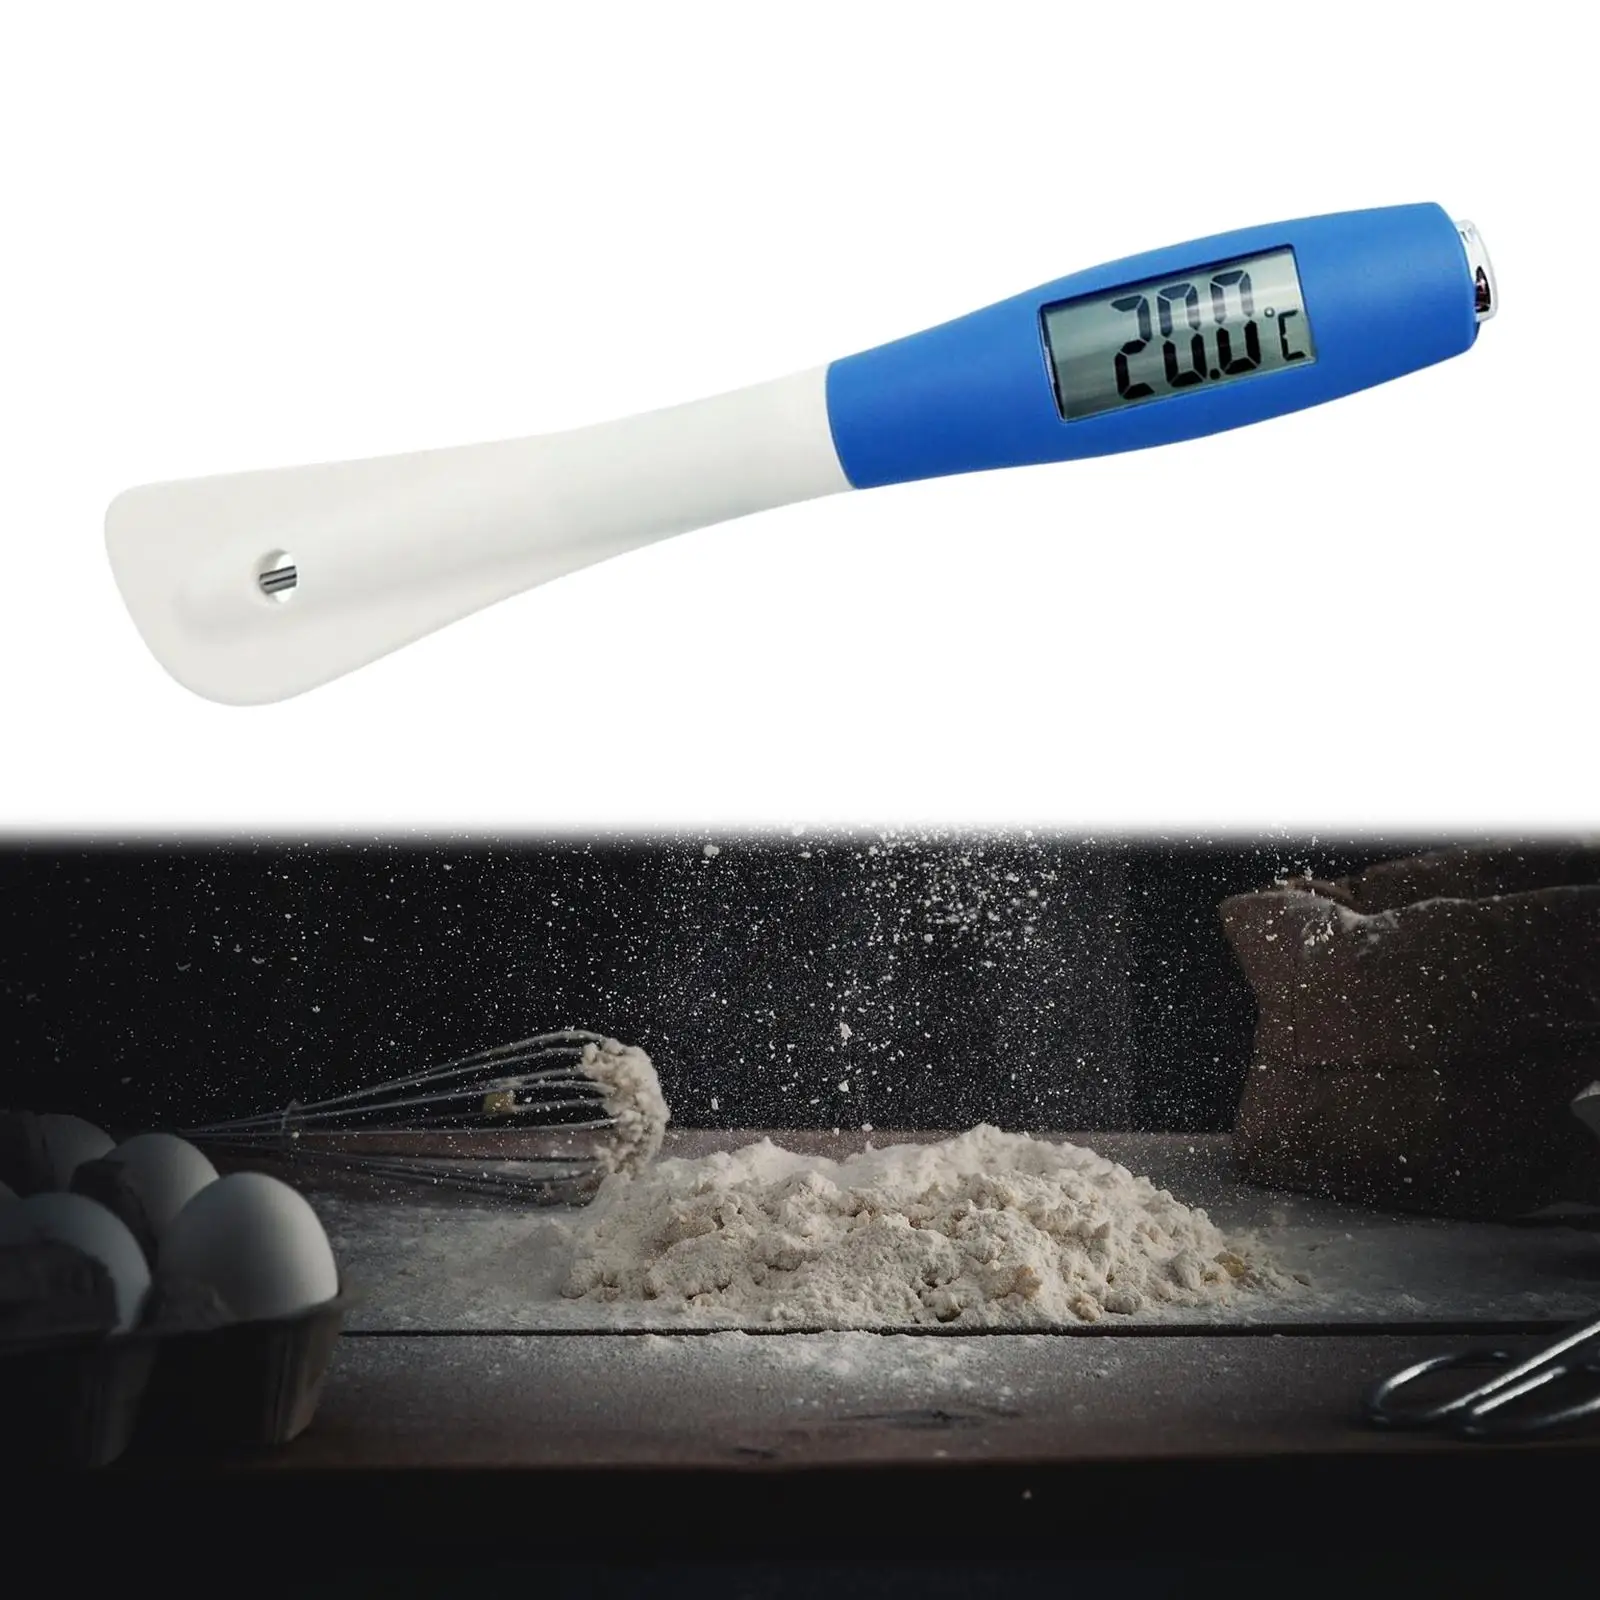 Digital Thermometer and Silicone Spatula for Jams, Household Baking Tool